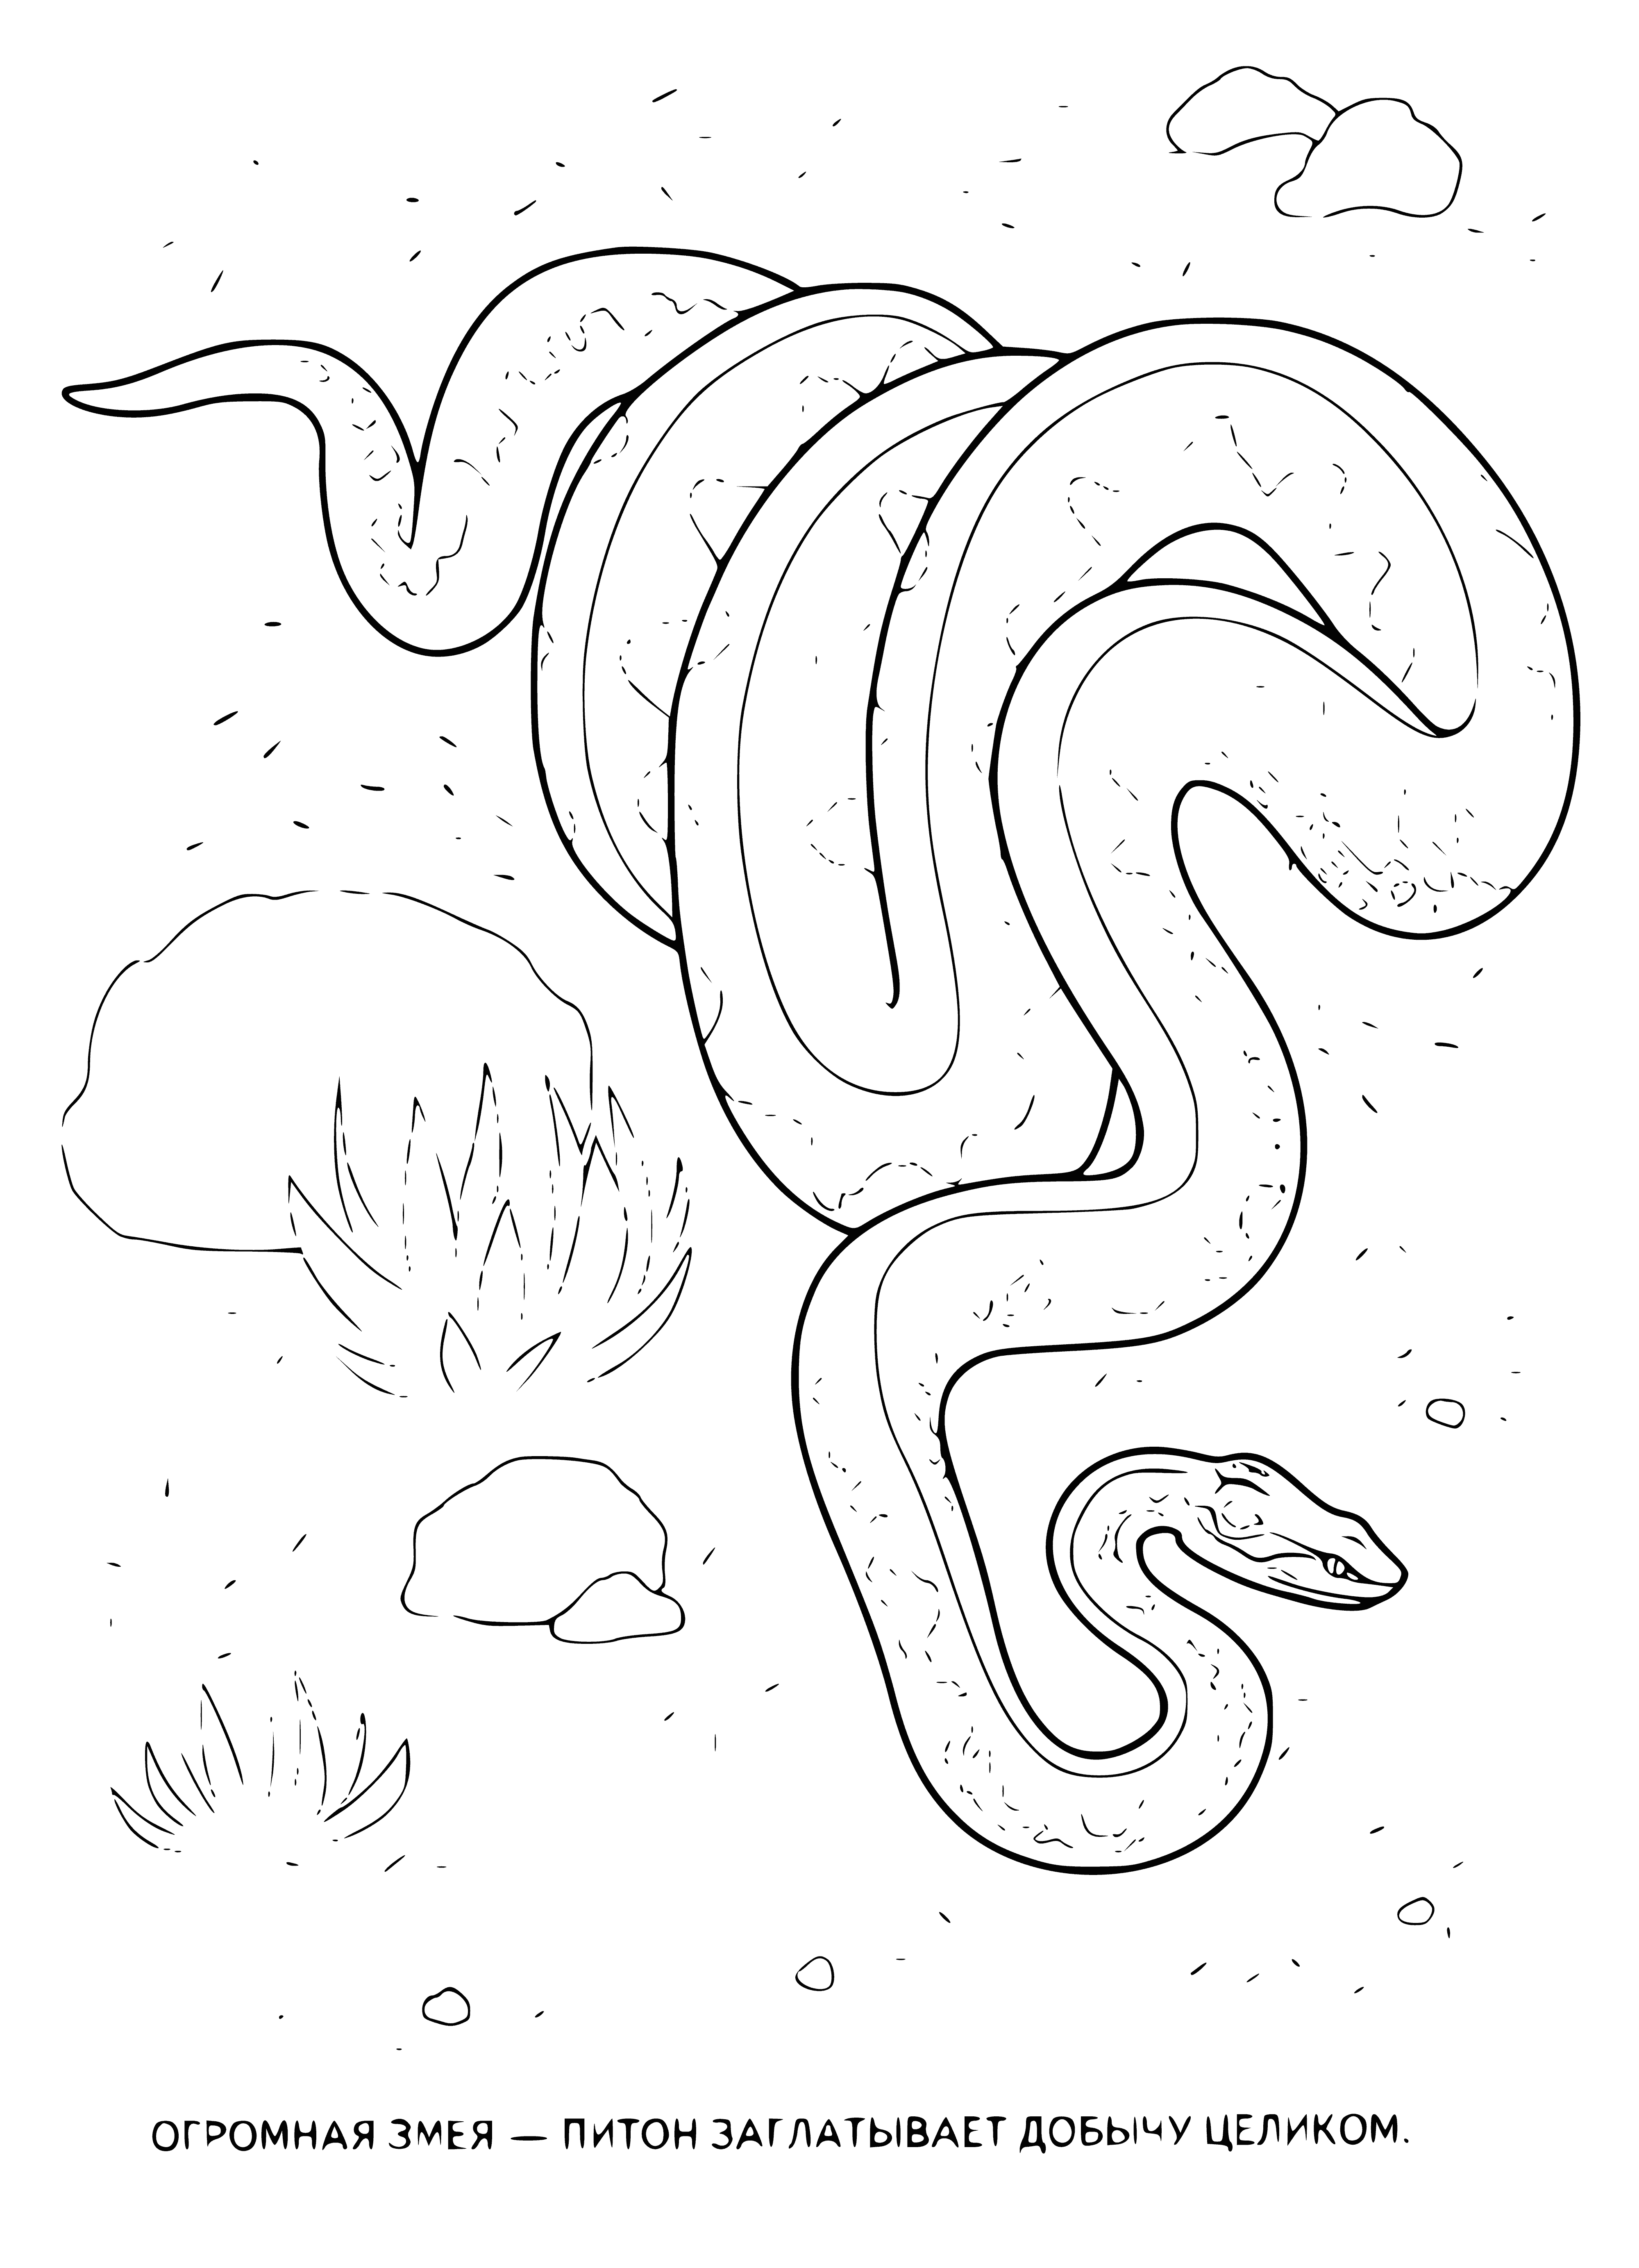 coloring page: Snake and bird perched on a branch in a colorful setting.